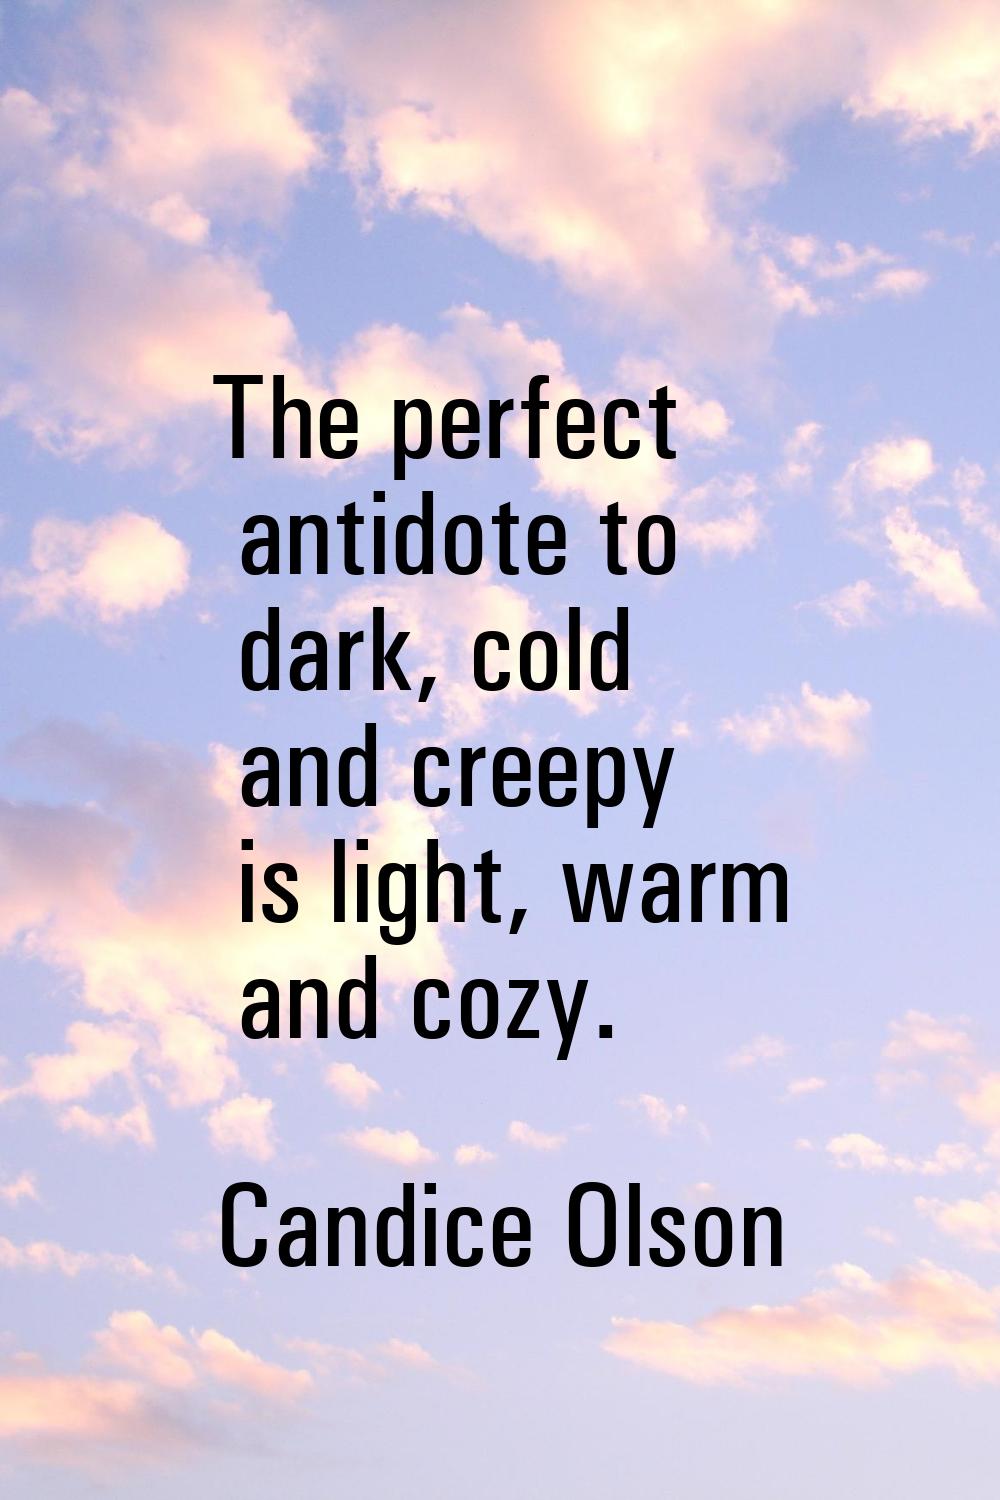 The perfect antidote to dark, cold and creepy is light, warm and cozy.